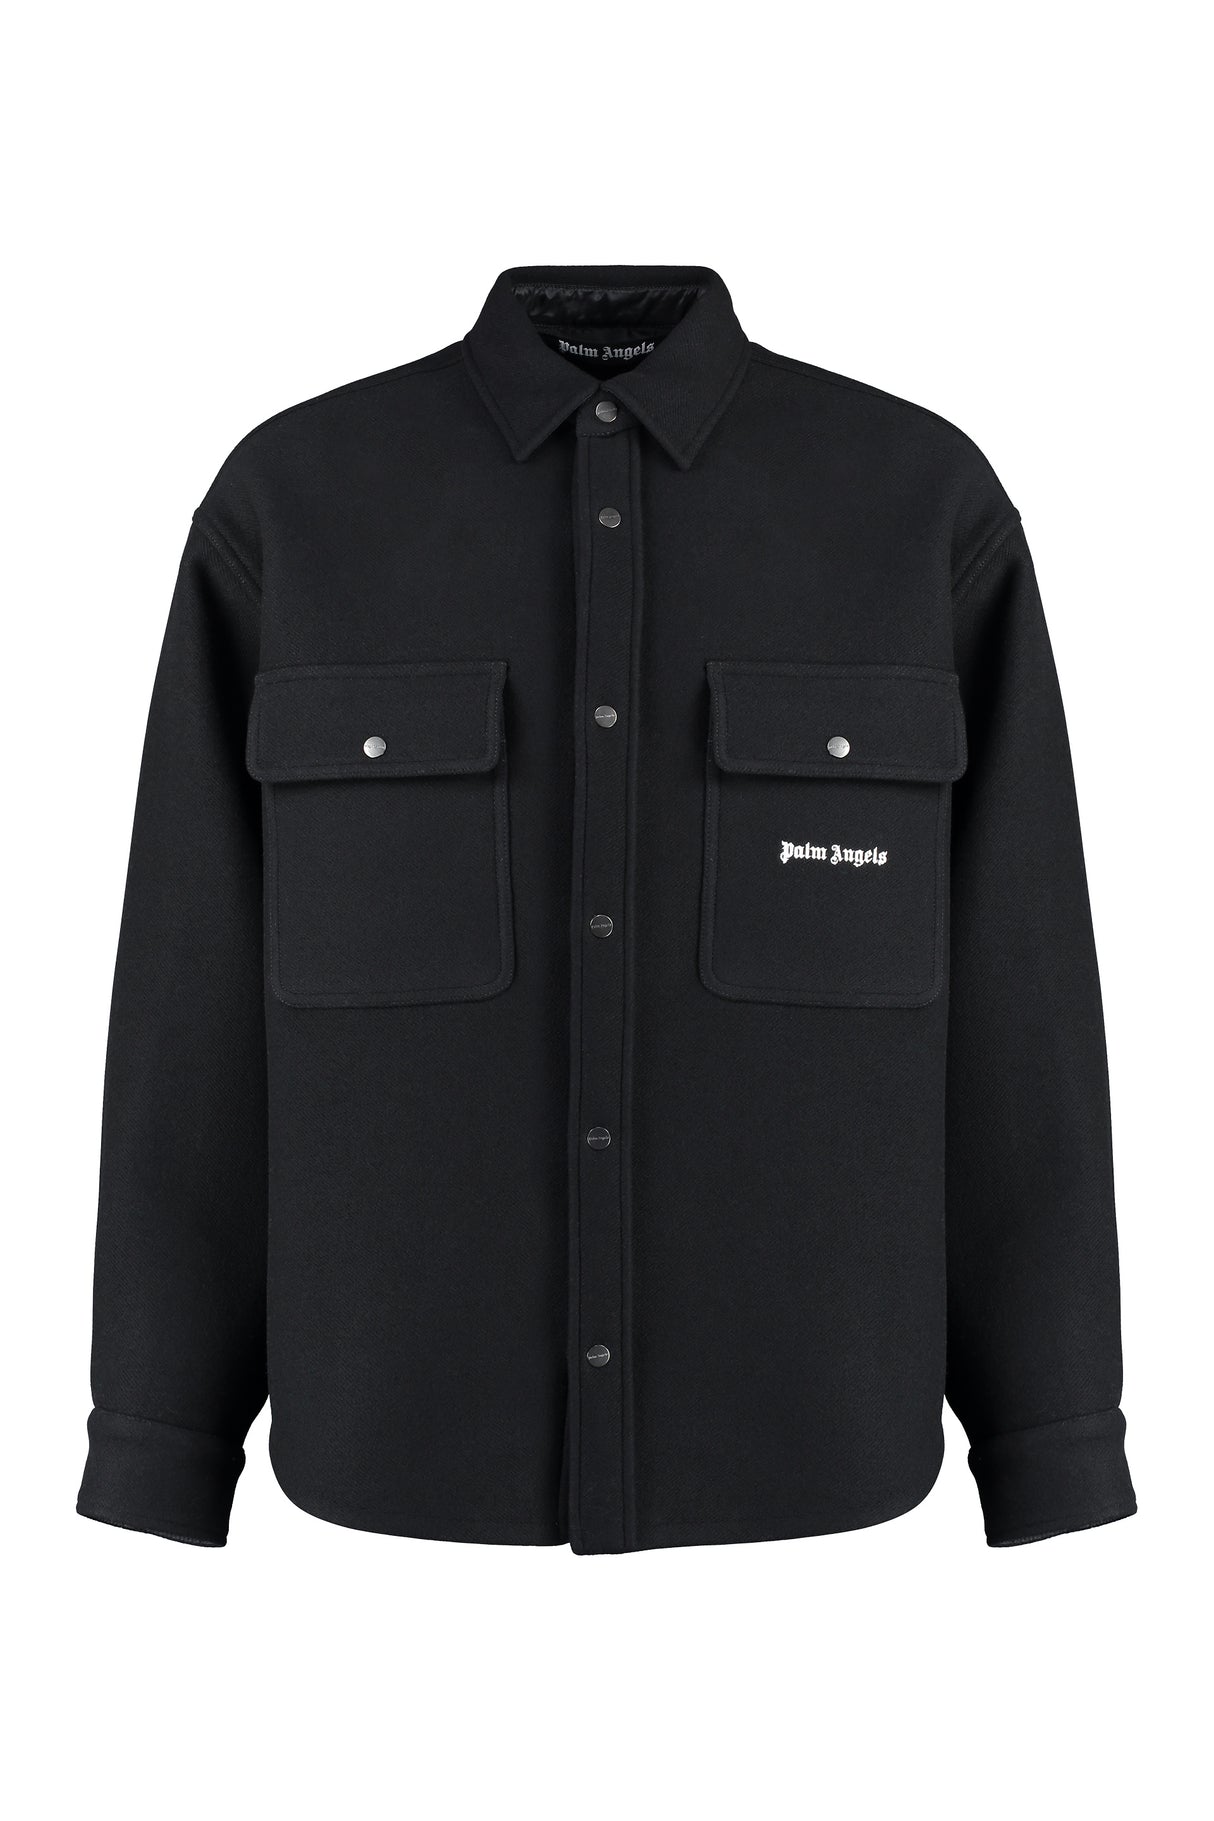 PALM ANGELS Black Virgin Wool Overshirt - Classic Collar, Two Buttoned Pockets, Oversize Fit